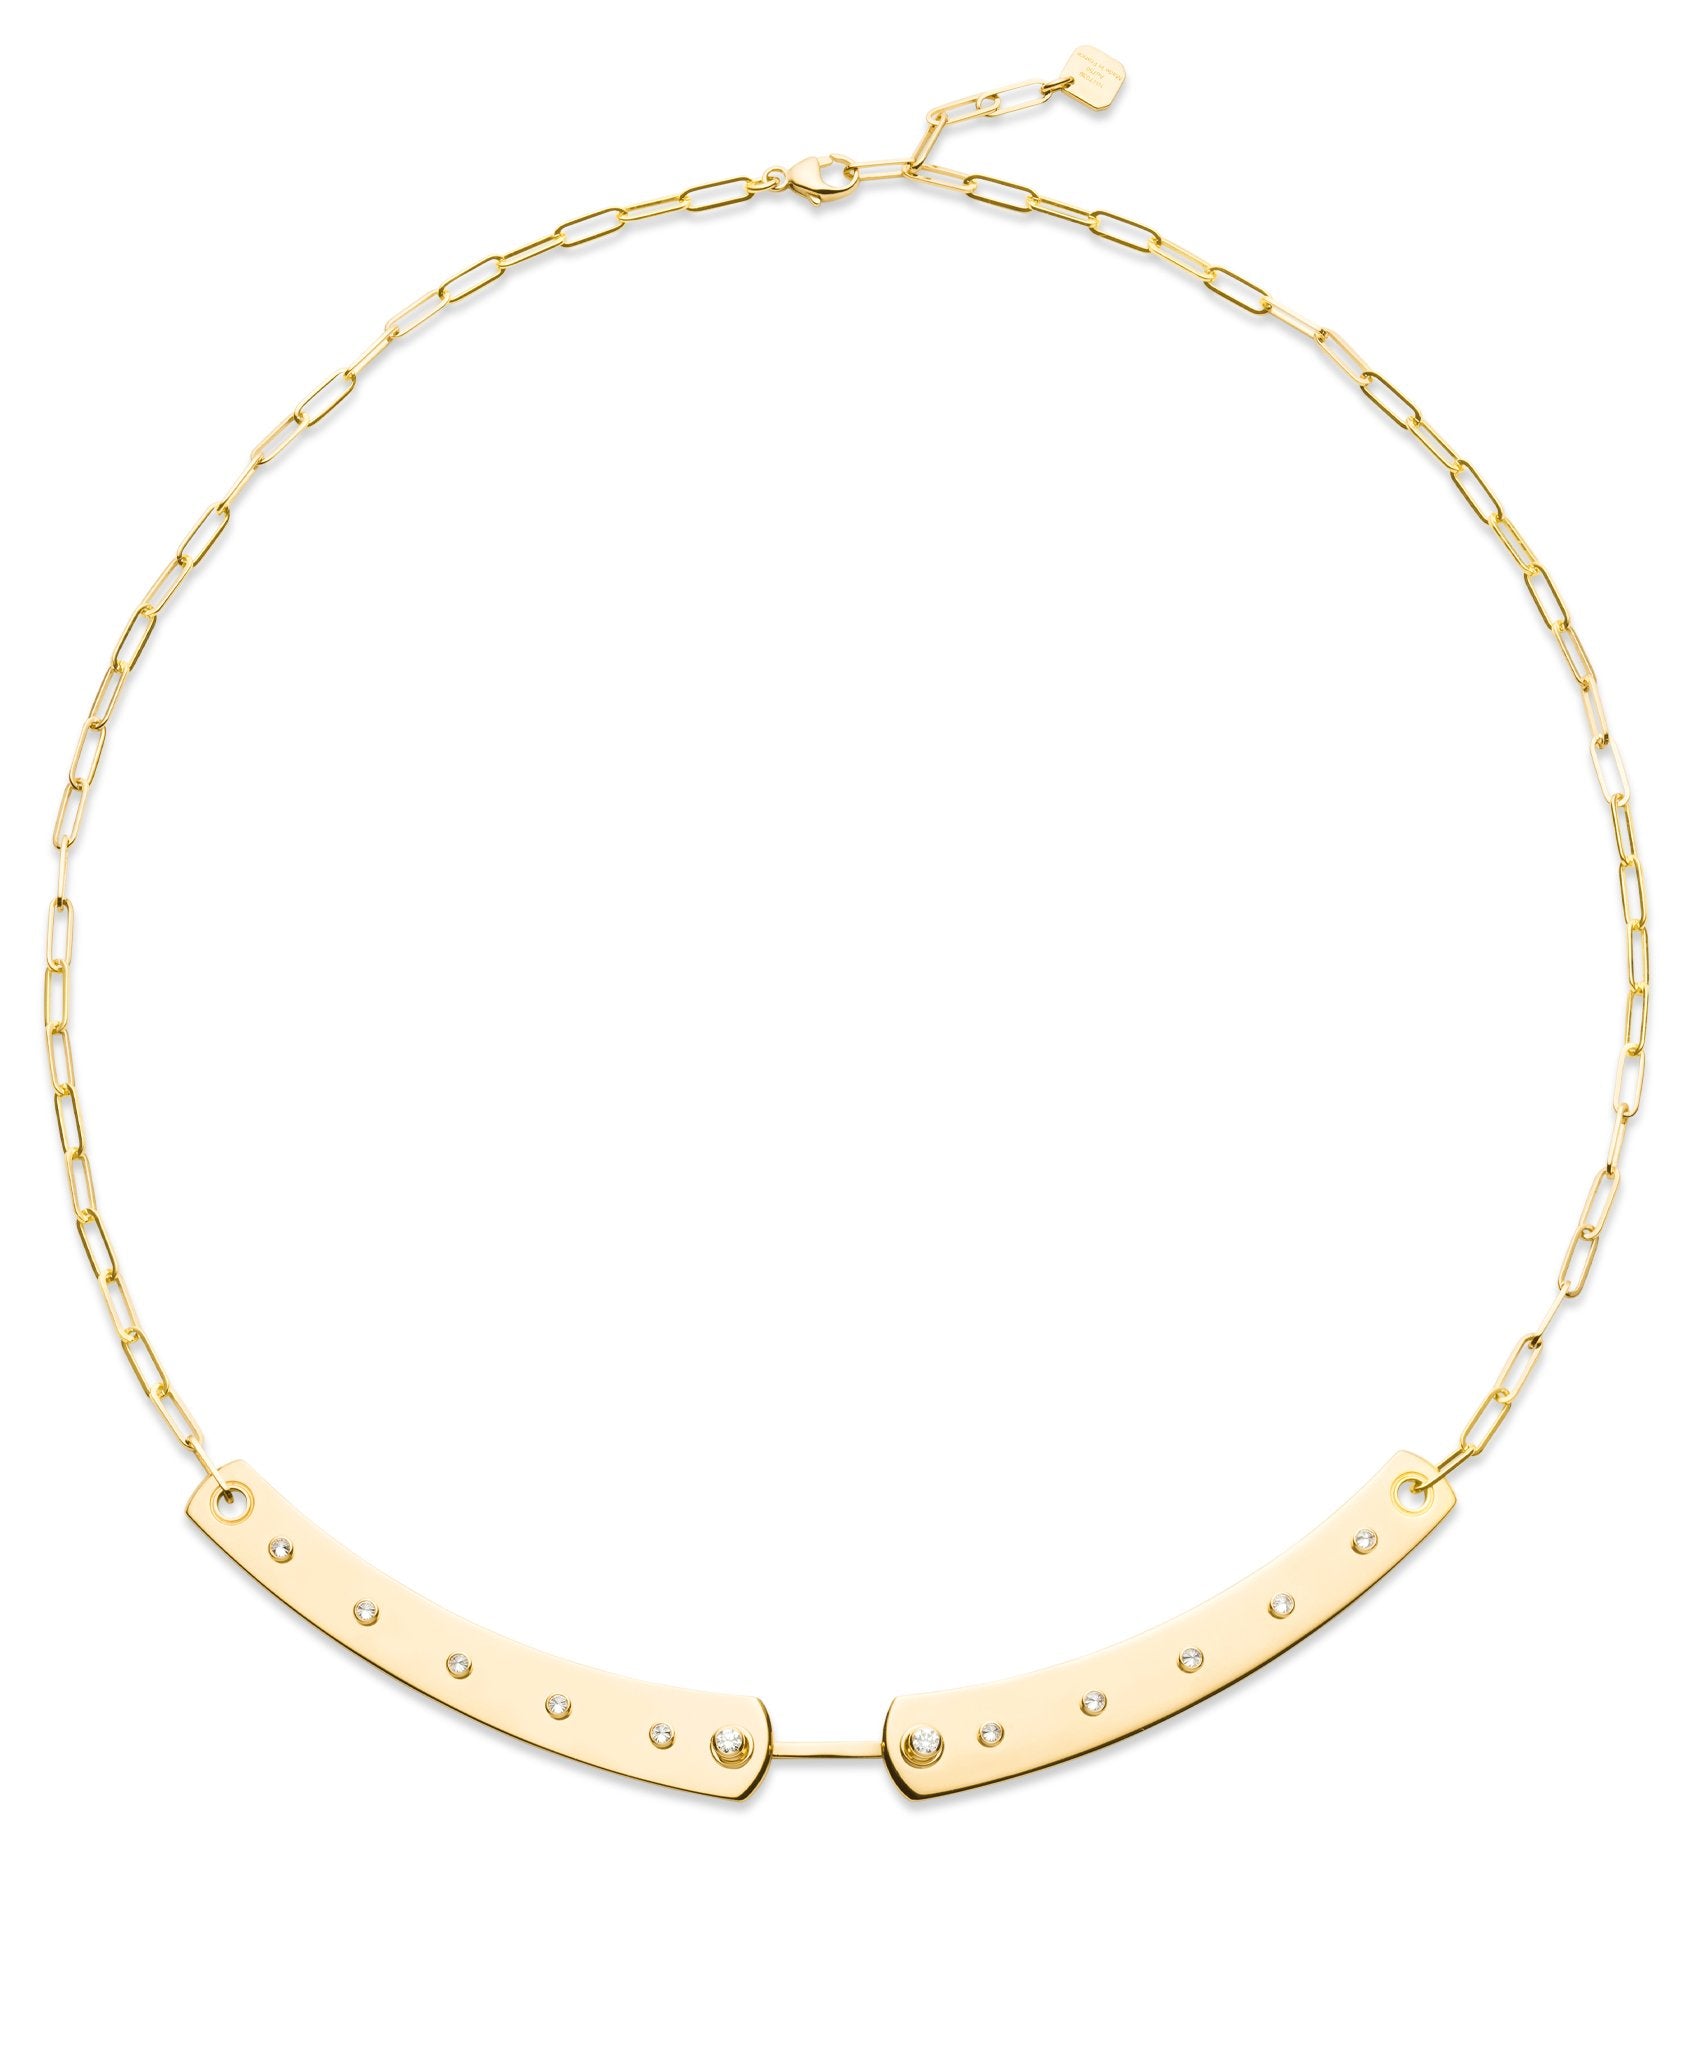 Brunch in NY Mood Necklace